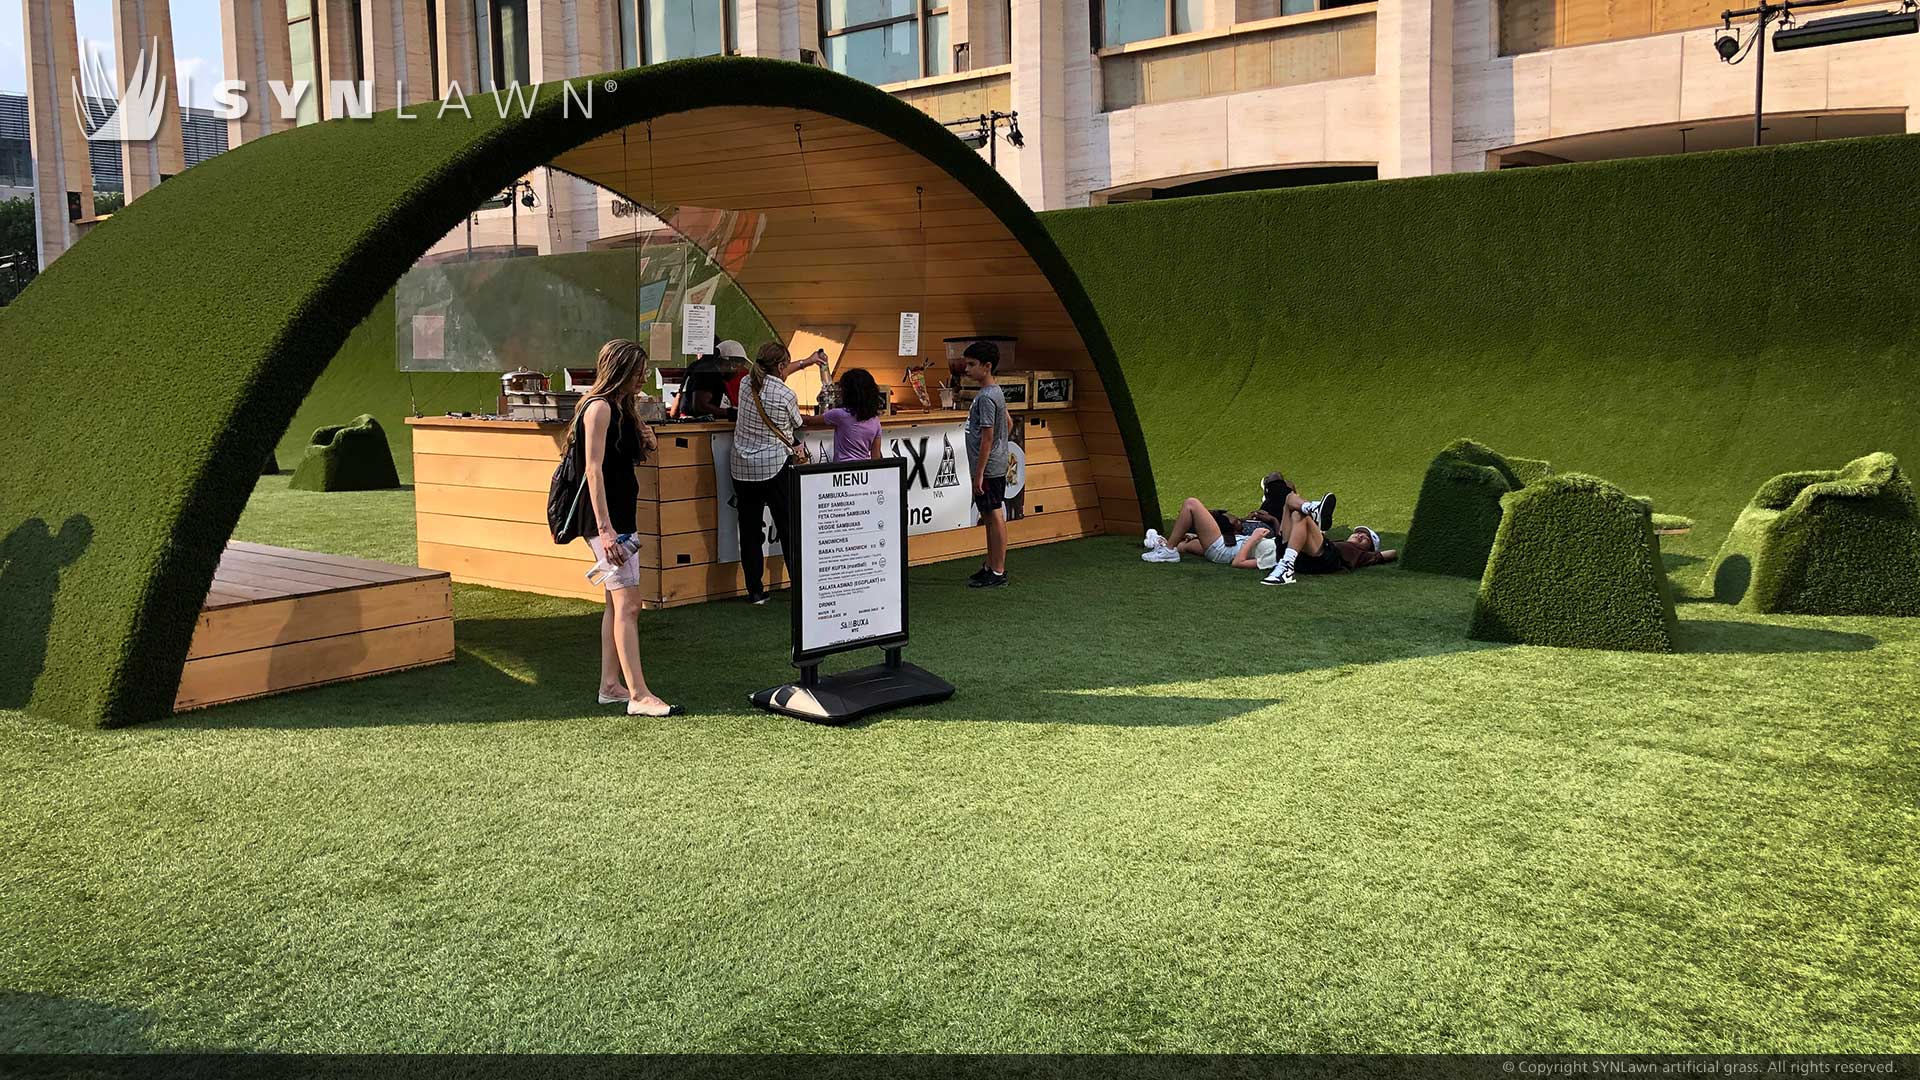 image of SYNLawn artificial grass at the Lincoln Center Plaza New York